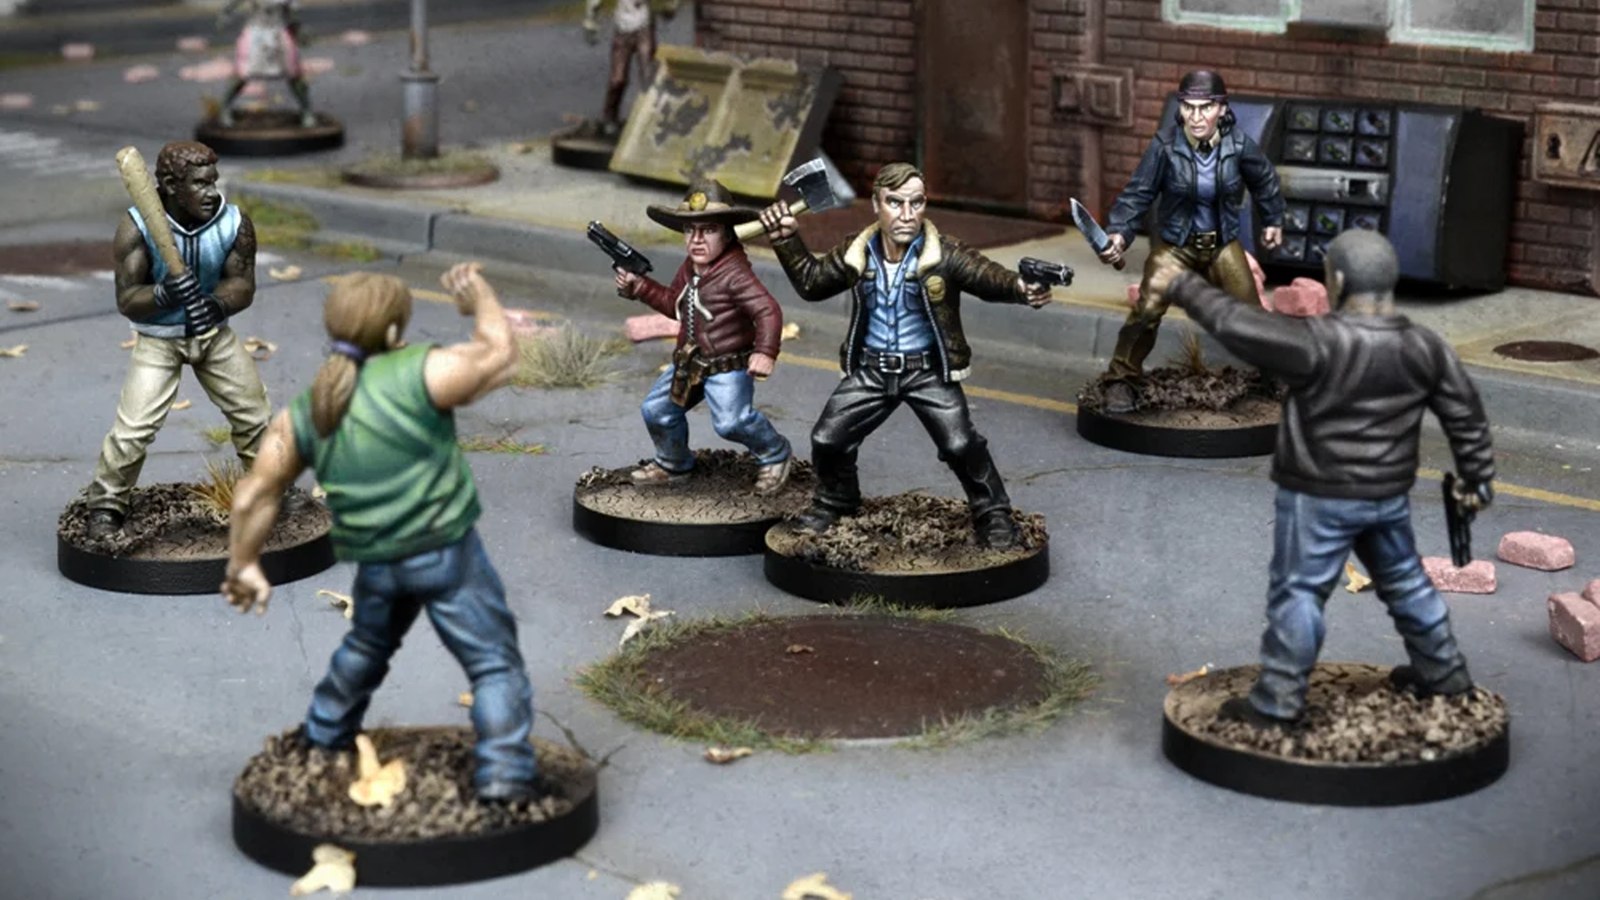 The End Games Miniatures Community